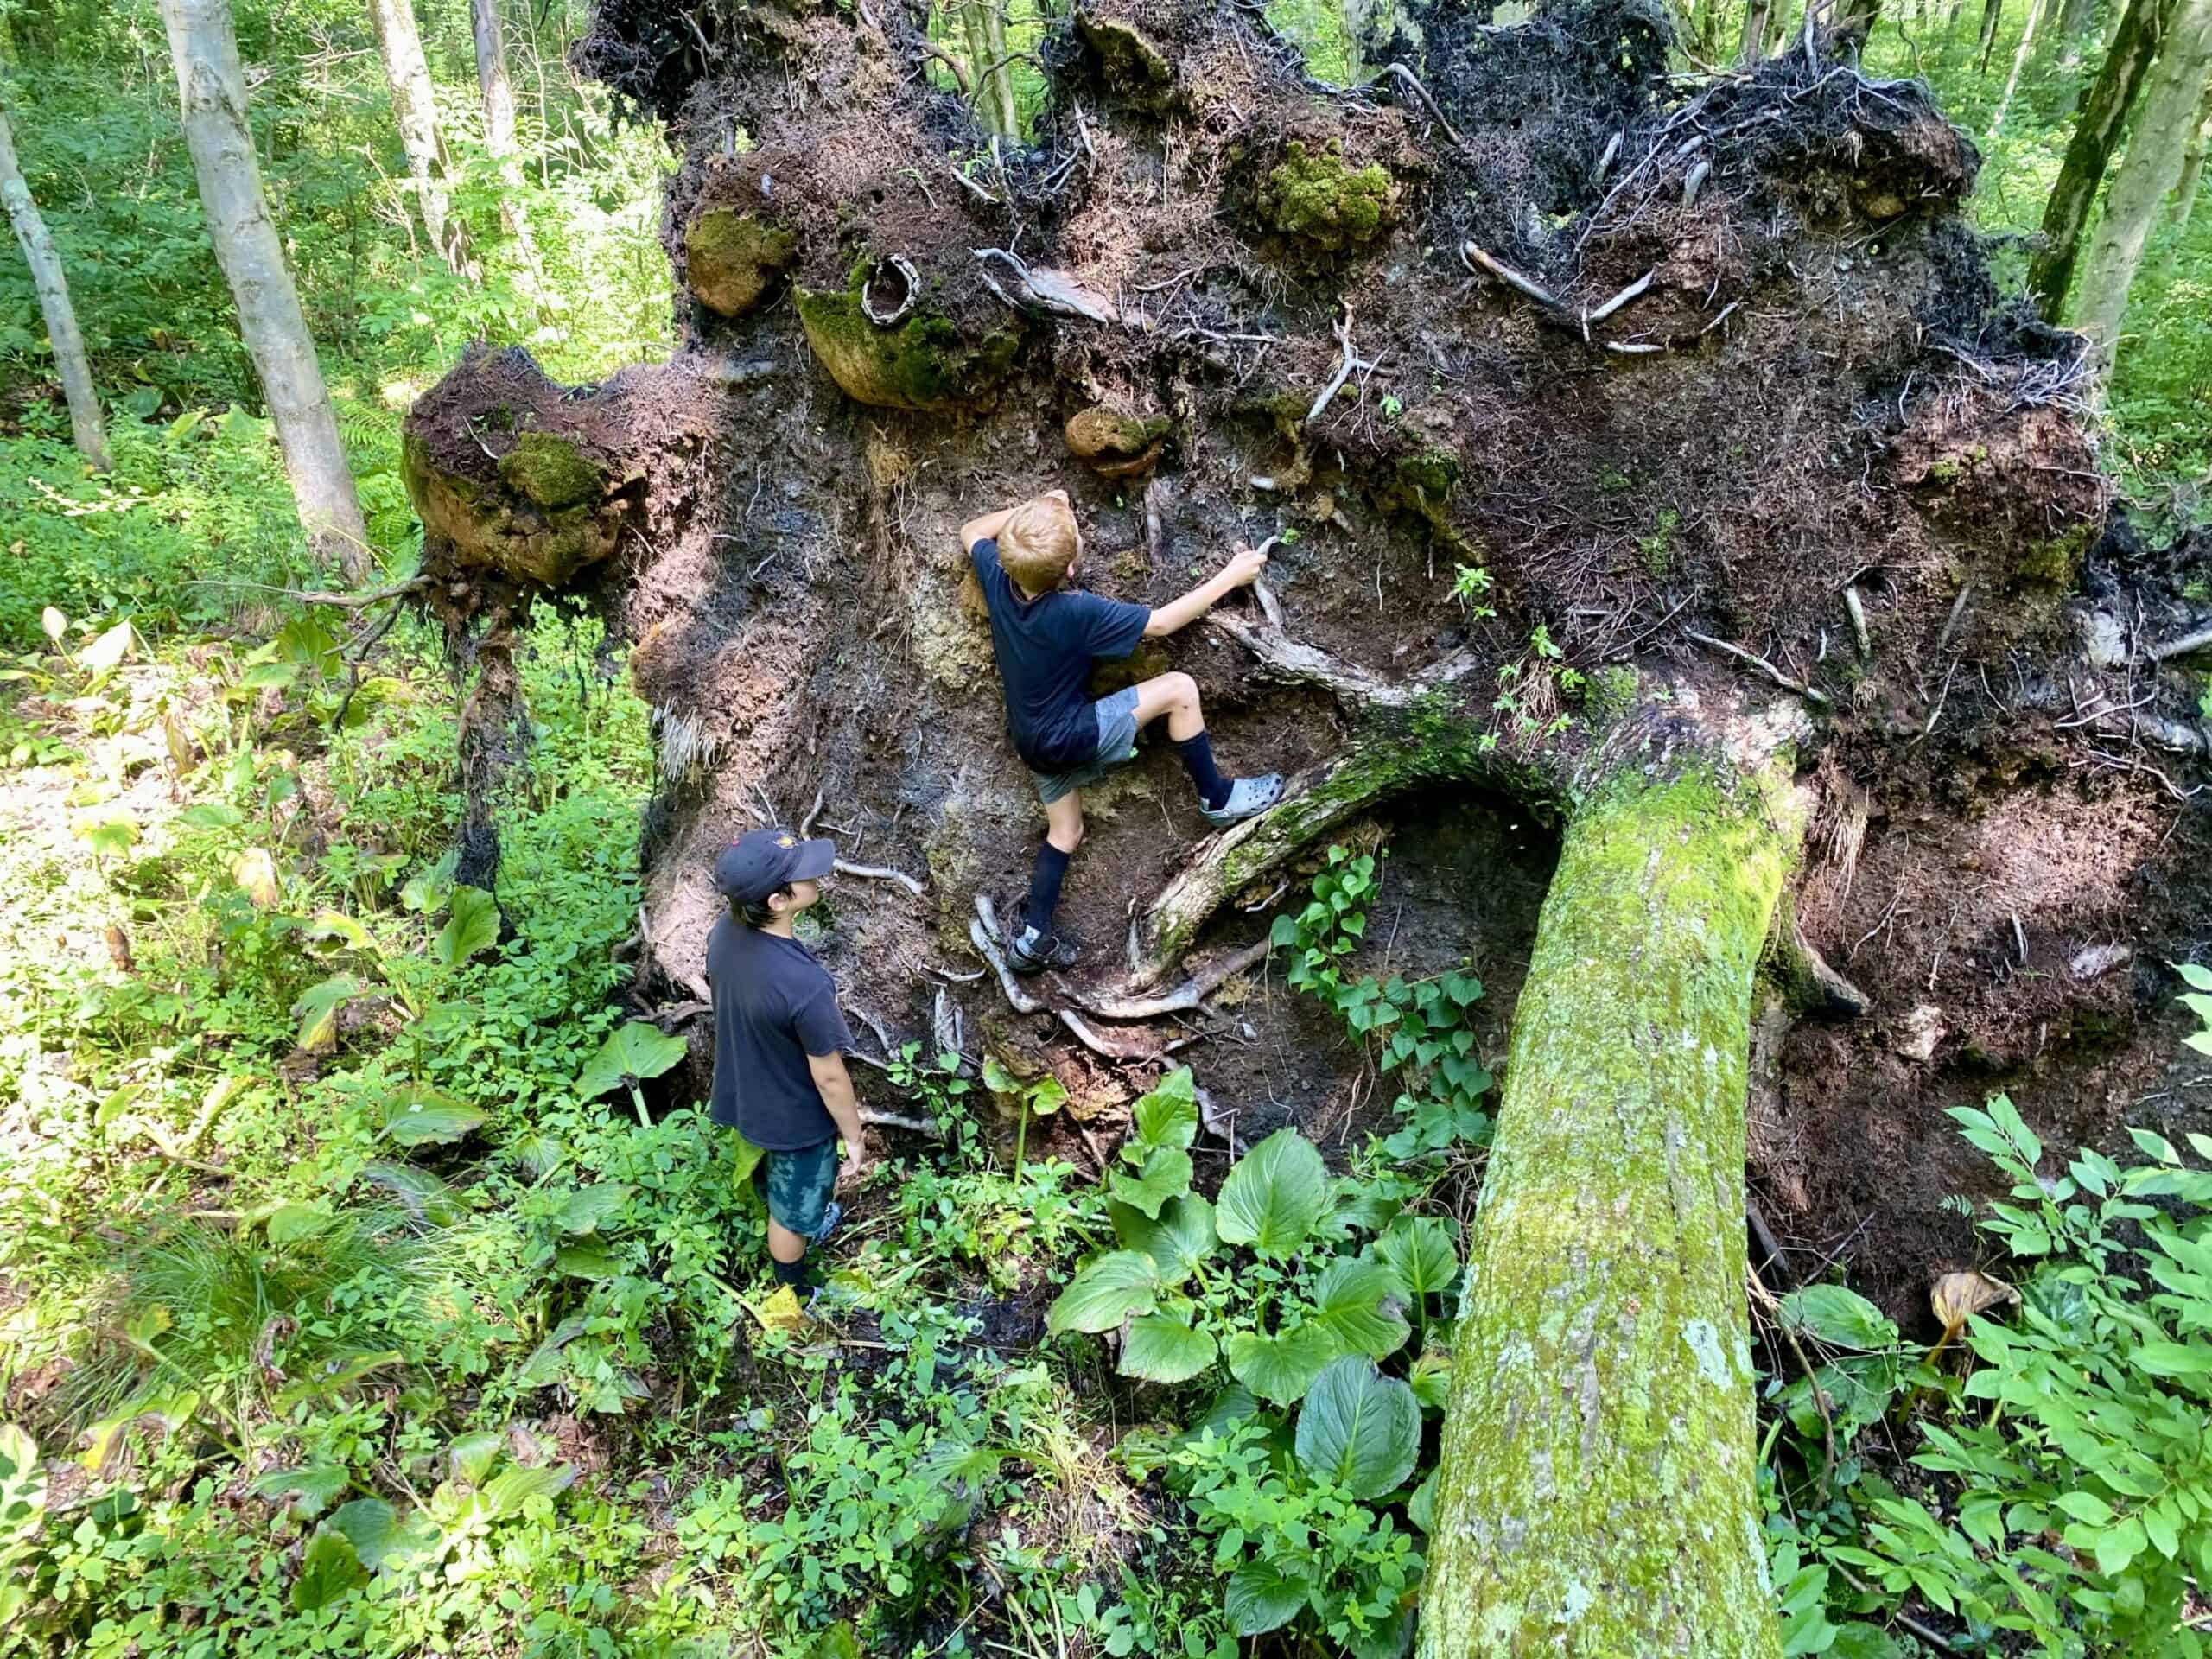 Kids climbing the roots of an upturned tree